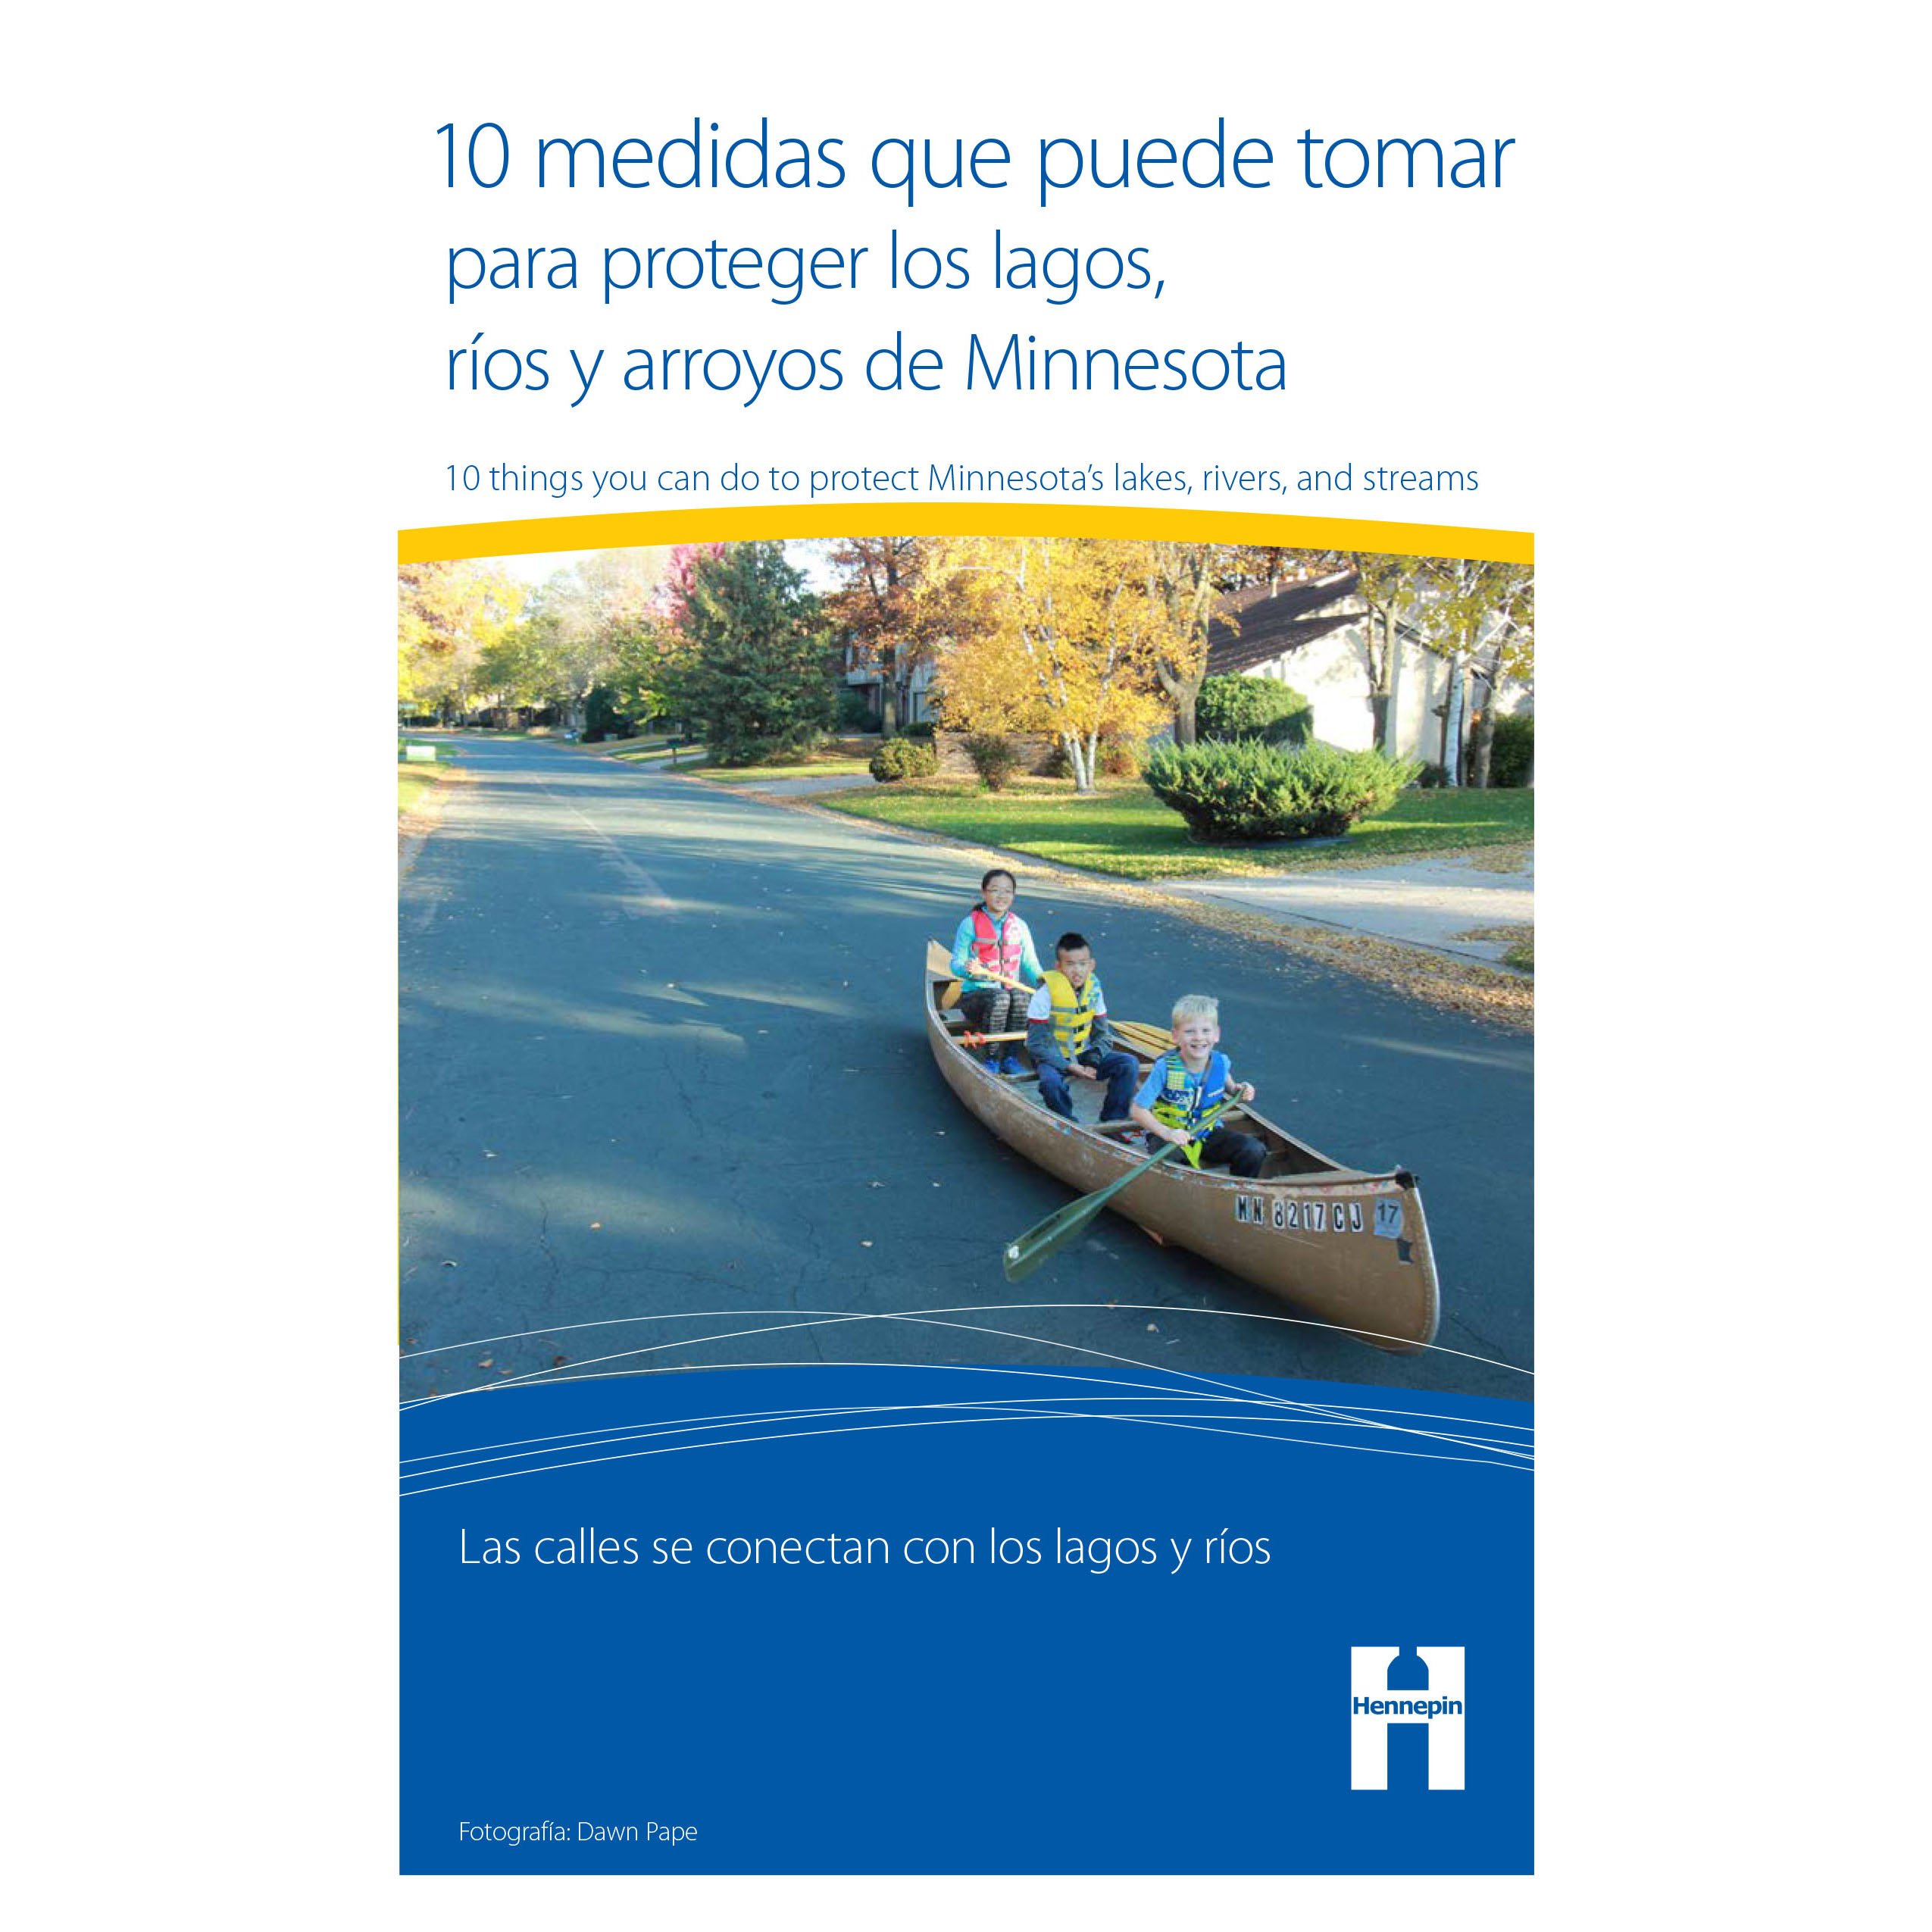 10 things to do to protect water quality: Spanish thumbnail